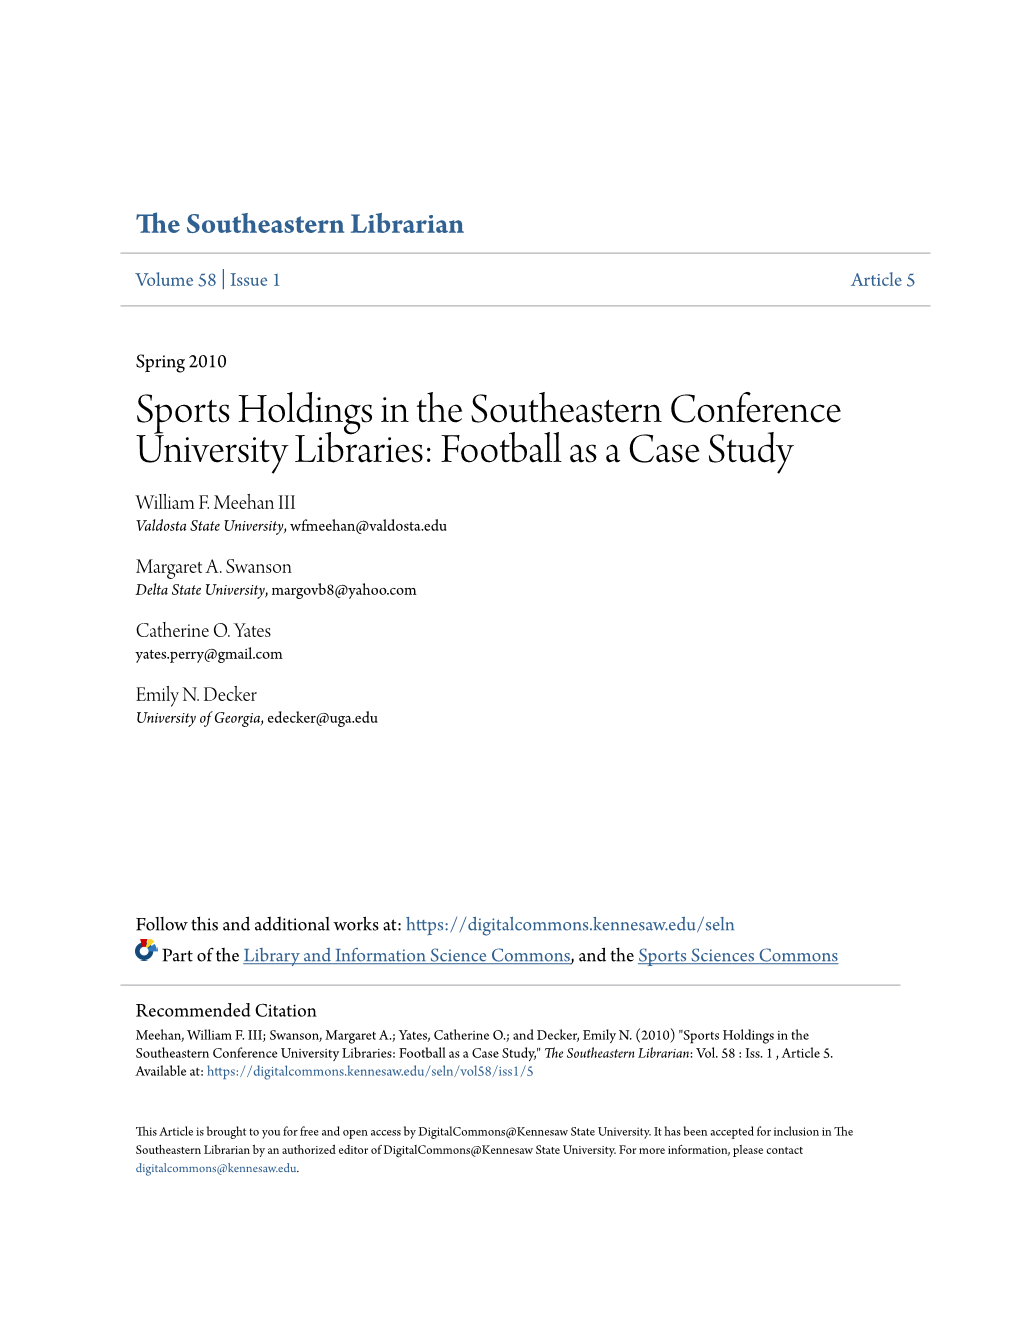 Sports Holdings in the Southeastern Conference University Libraries: Football As a Case Study William F